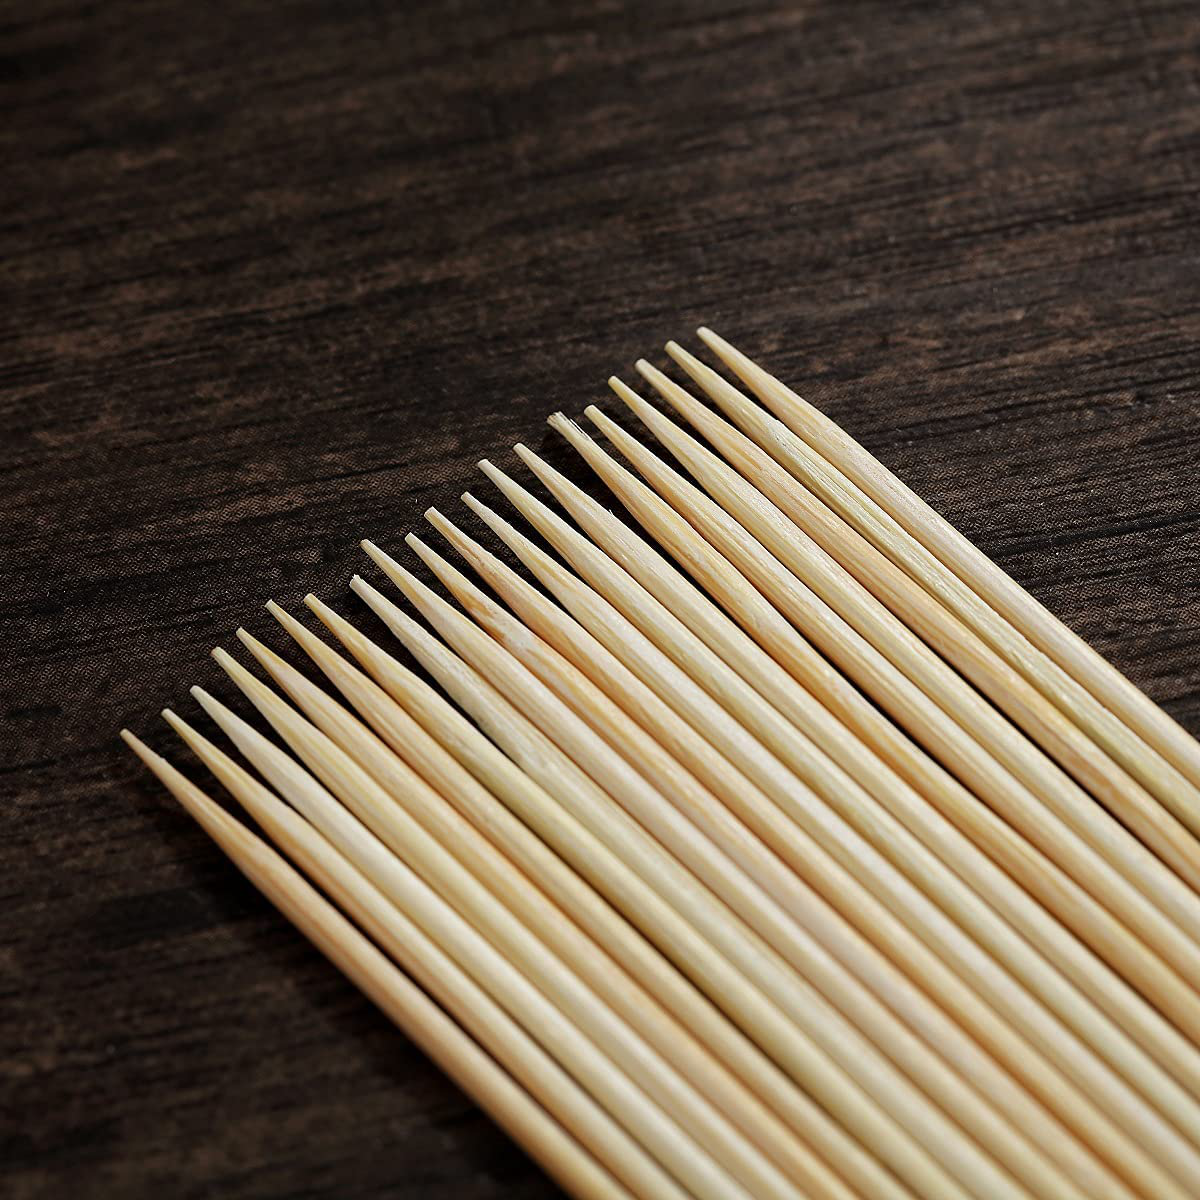 2400 Bamboo Wooden Toothpicks,Sturdy Safe Toothpick, Natural Wood Toothpicks,Used for Party, Appetizer, Barbecue, Fruit, Teeth Cleaning Toothpicks(8 Pack/2400 Piece)